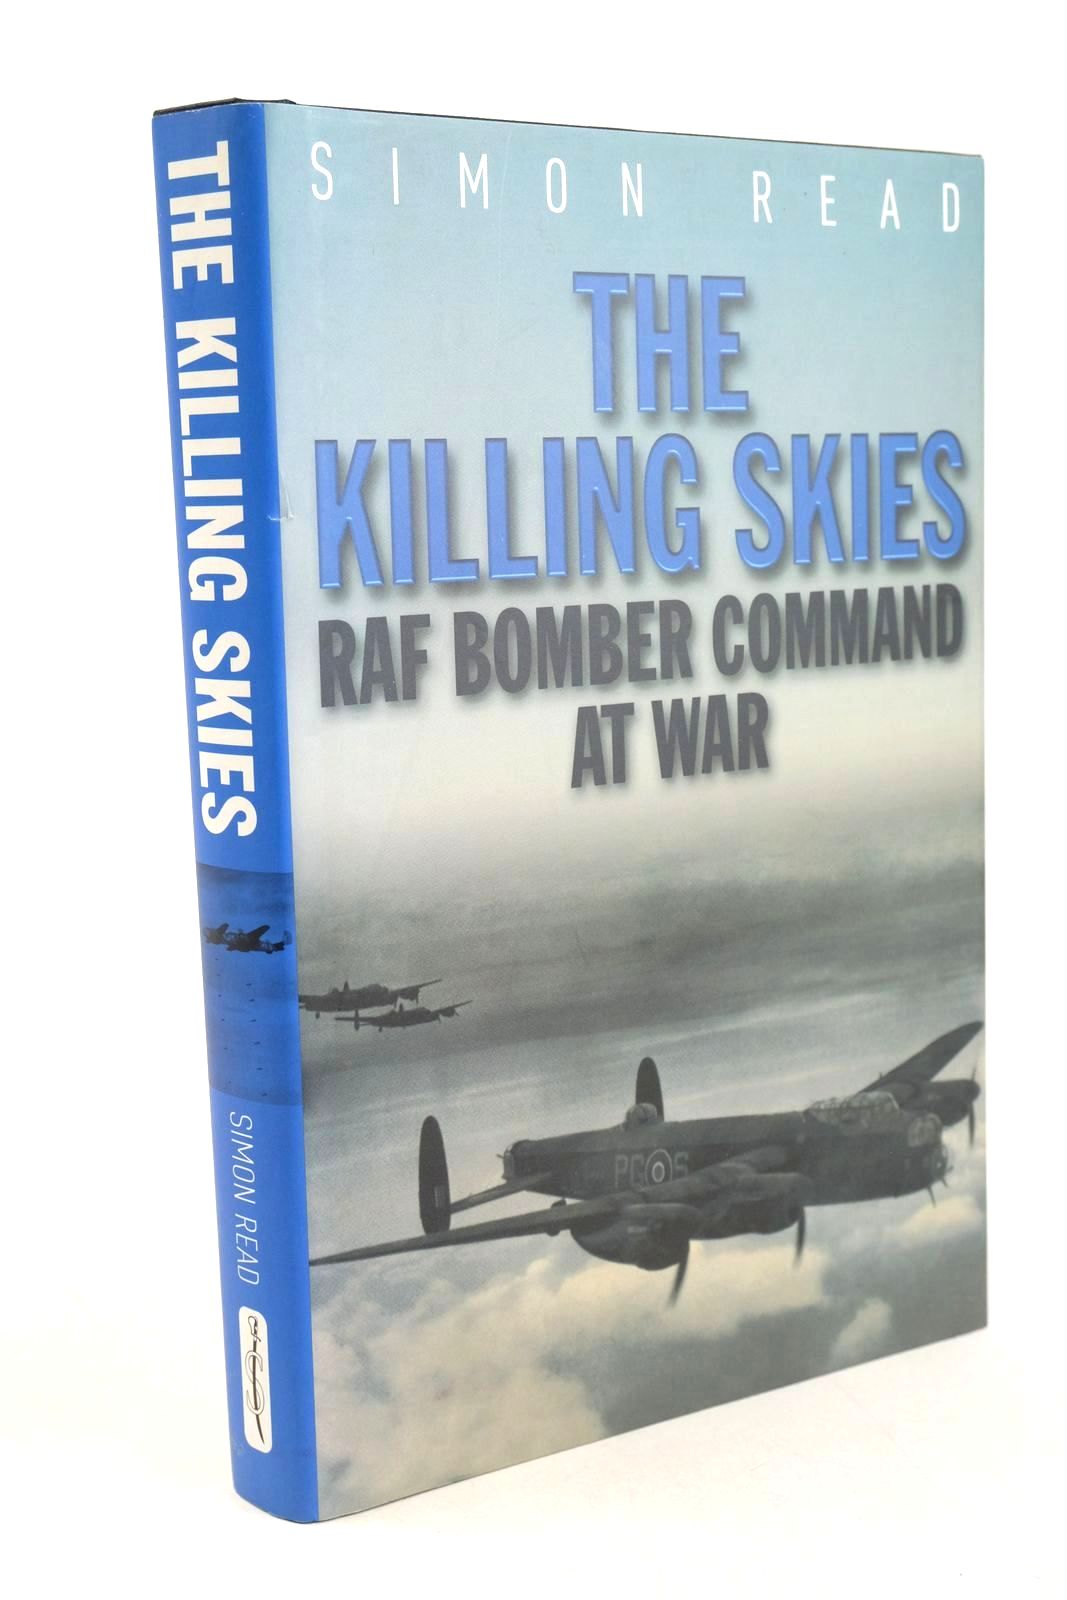 Photo of THE KILLING SKIES: RAF BOMBER COMMAND AT WAR written by Read, Simon published by Spellmount Ltd. (STOCK CODE: 1327923)  for sale by Stella & Rose's Books